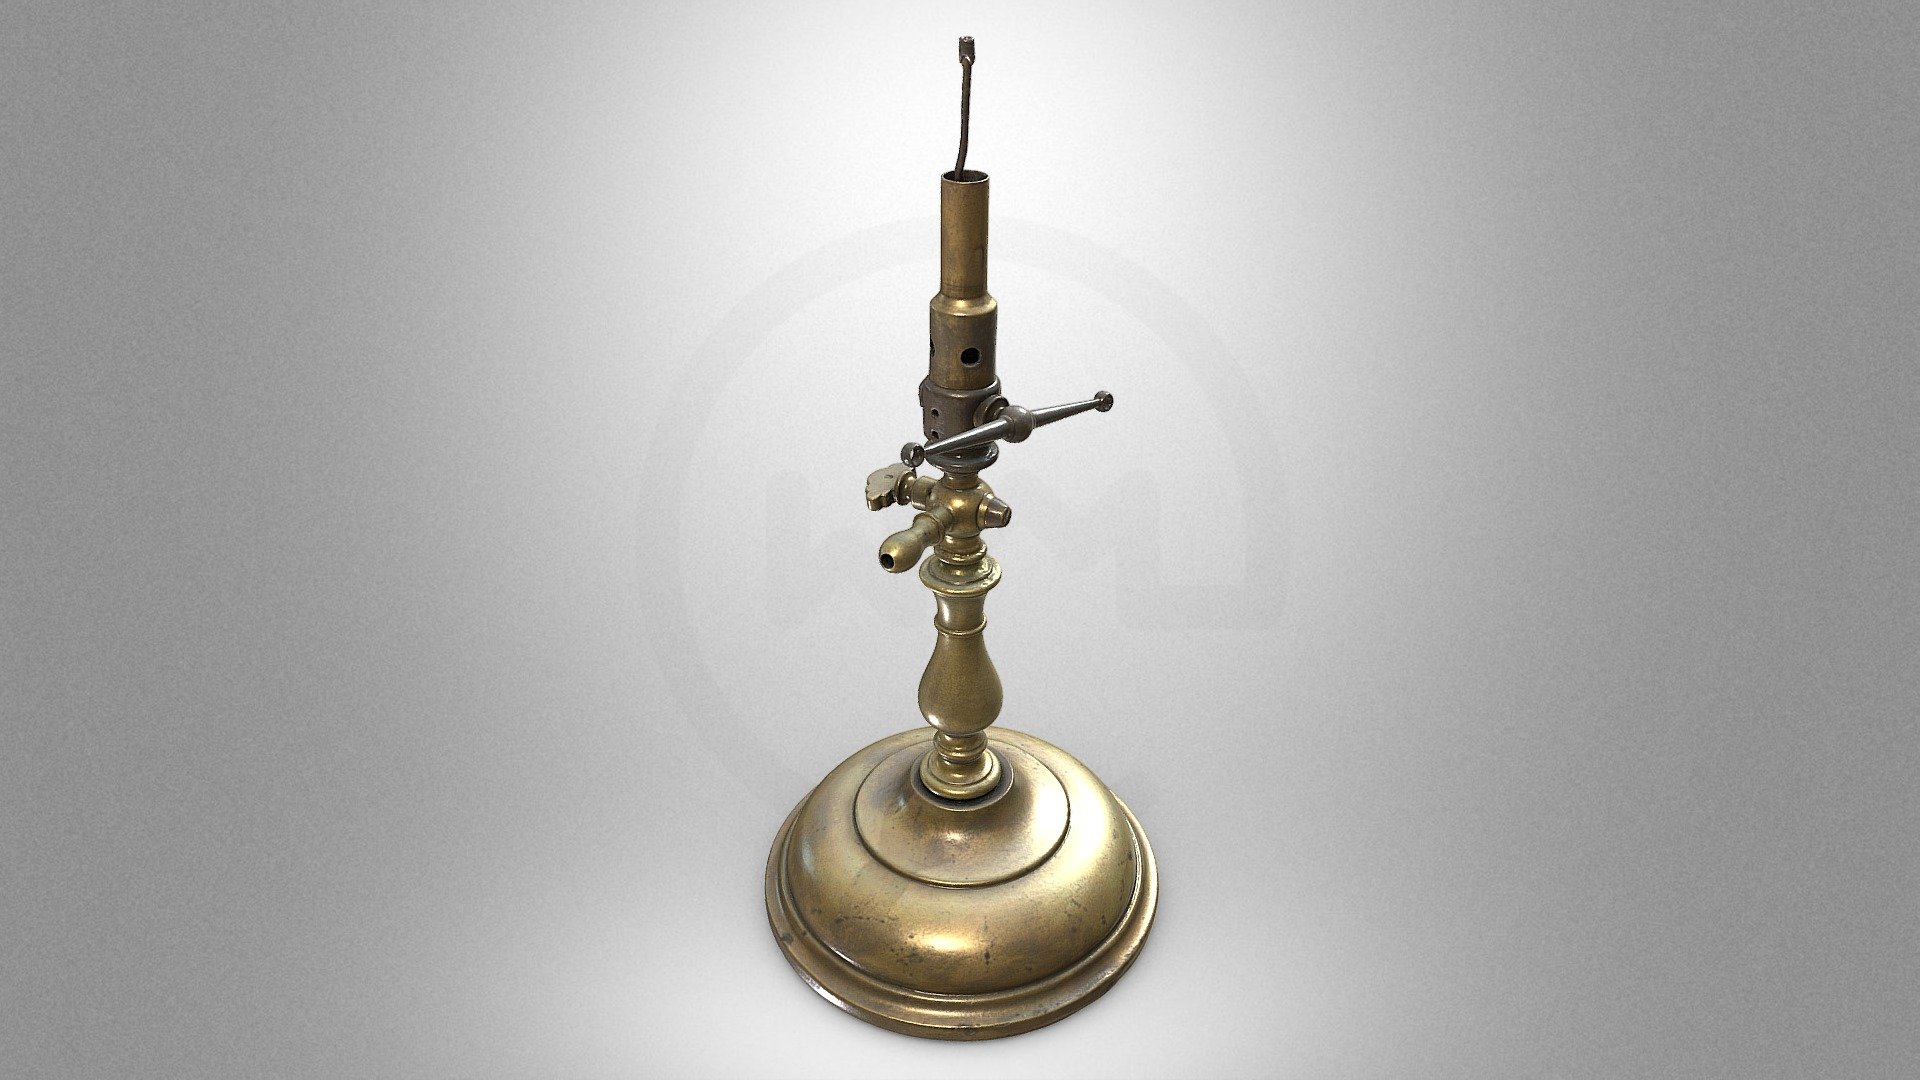 late 19th century

Jagiellonian University Museum Collegium Maius

Inventory number:
4711; 716/V

https://muzea.malopolska.pl/en/objects-list/2823 - Laboratory gas burner - Download Free 3D model by Virtual Museums of Małopolska (@WirtualneMuzeaMalopolski) 3d model